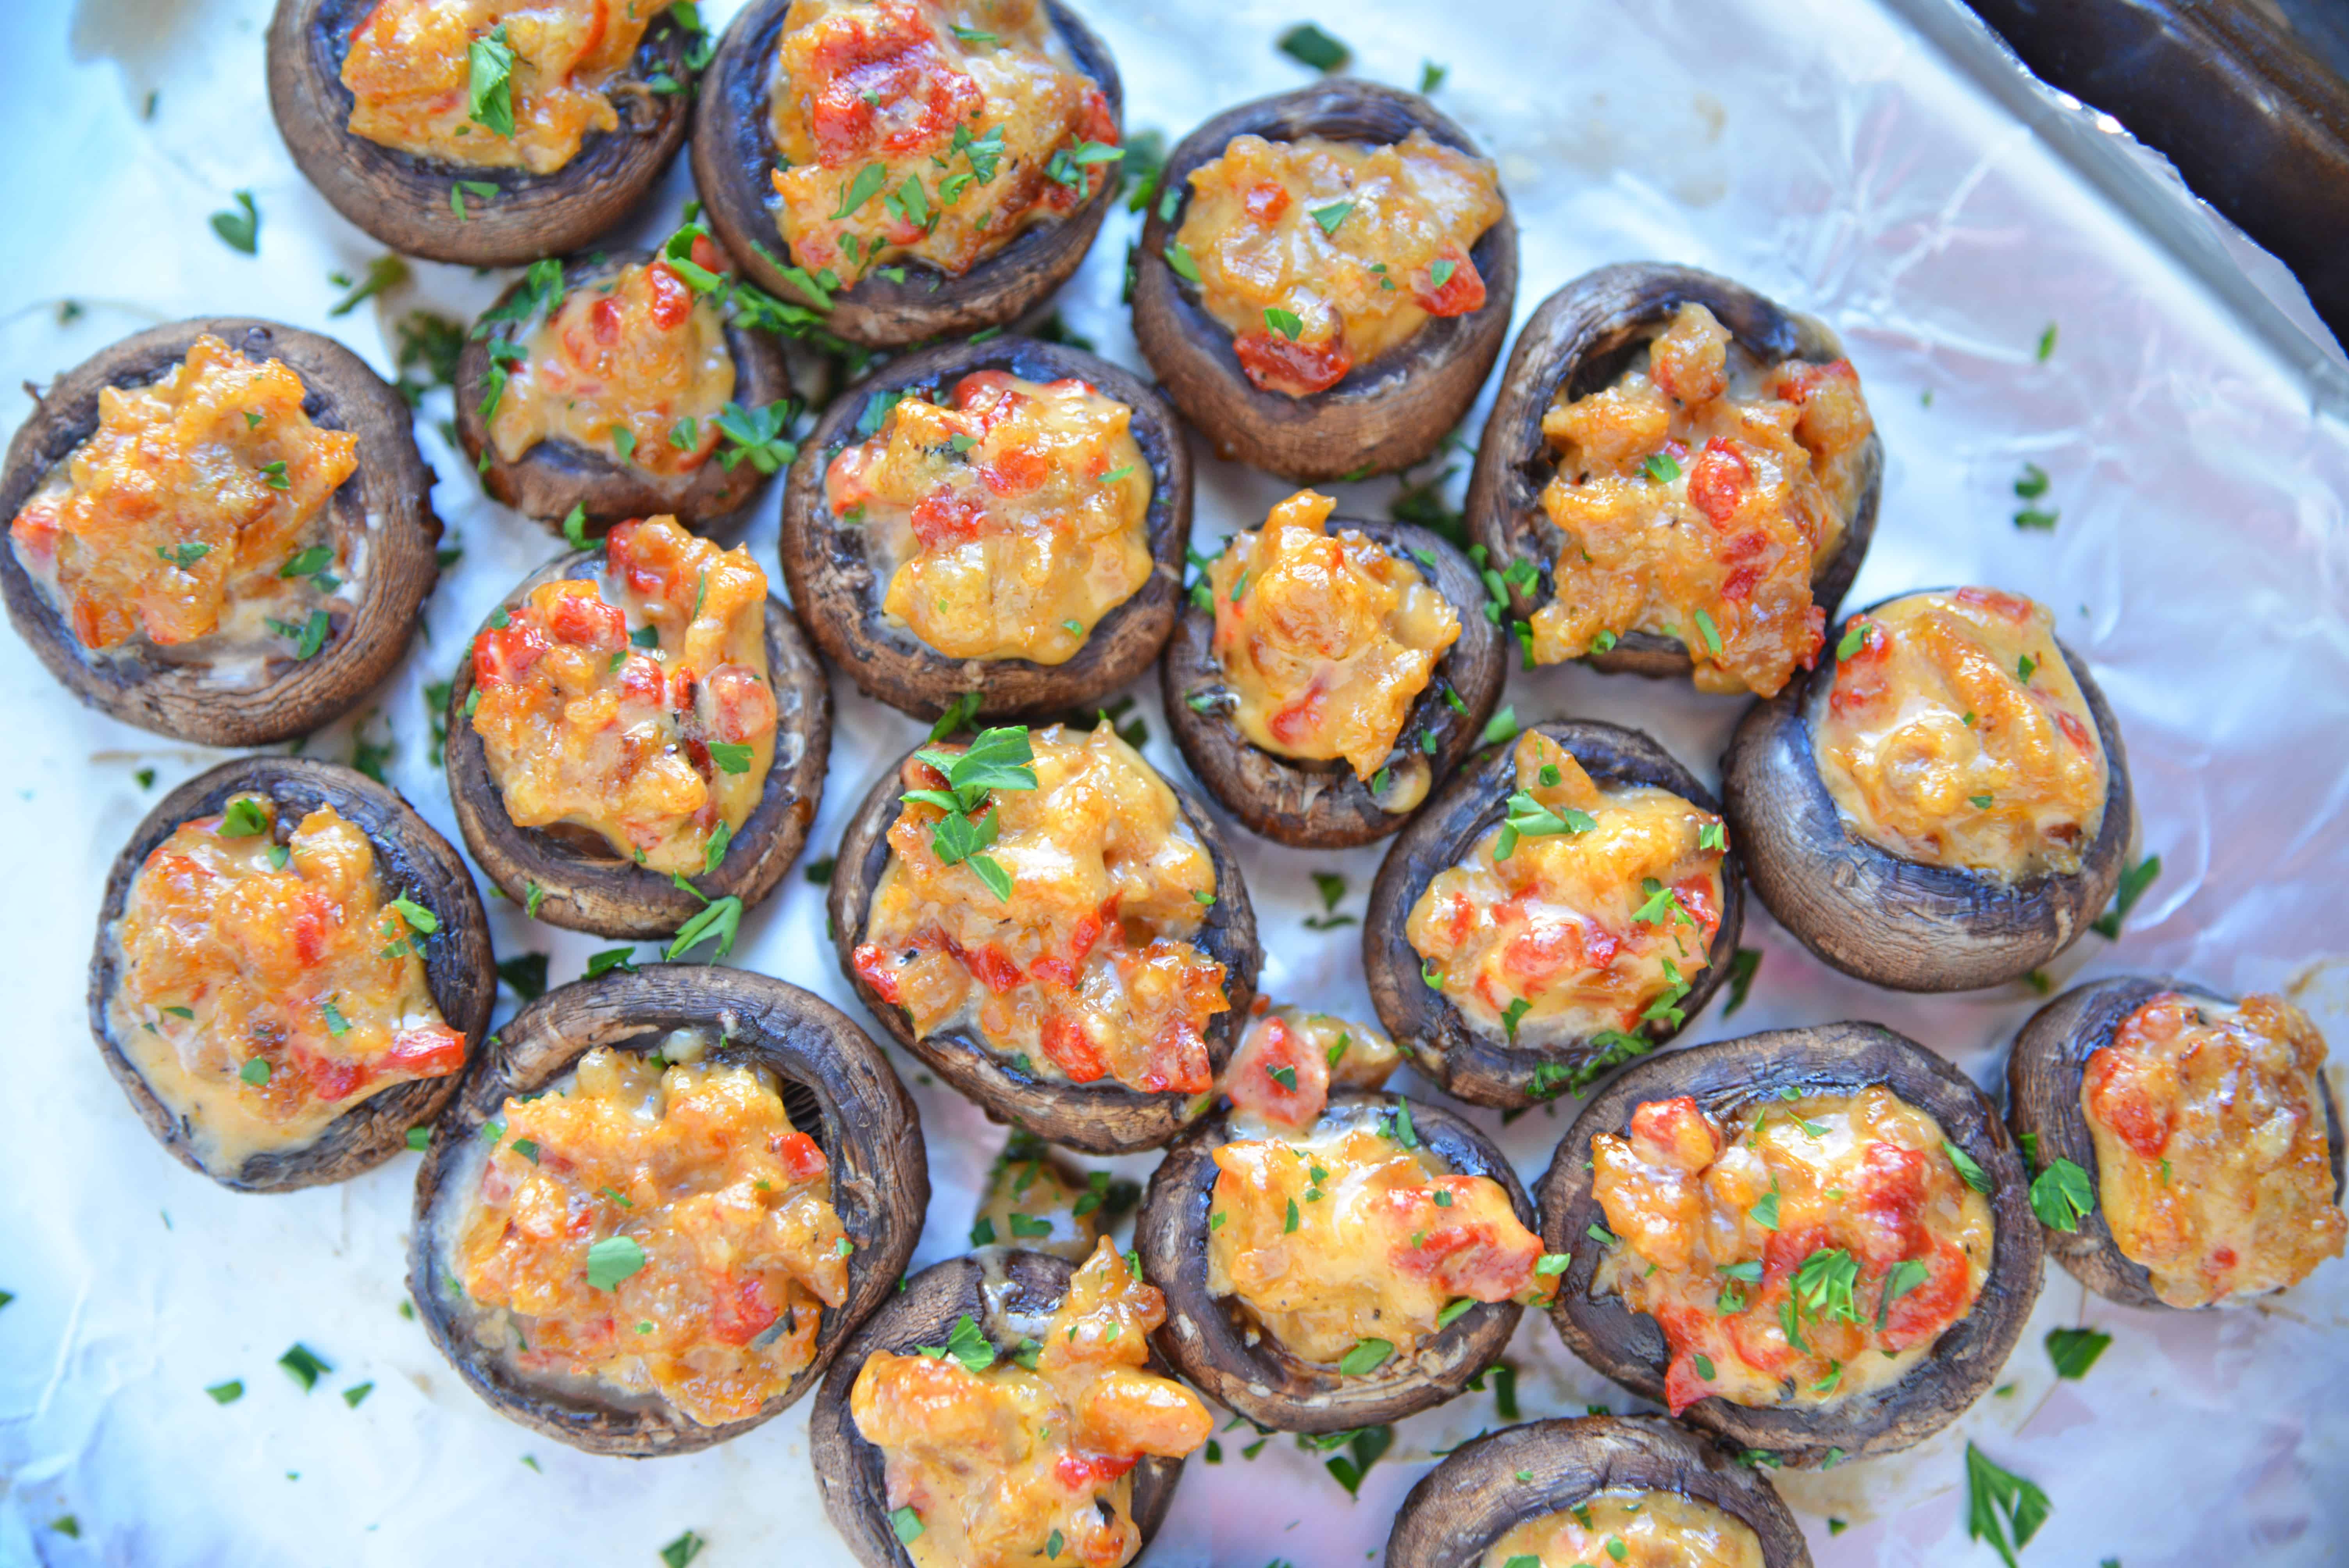 Alfredo Sausage Stuffed Mushrooms are an easy appetizer that's perfect for holiday parties. Everyone will love these stuffed mushrooms with sausage! #sausagestuffedmushrooms #stuffedmushrooms www.savoryexperiments.com